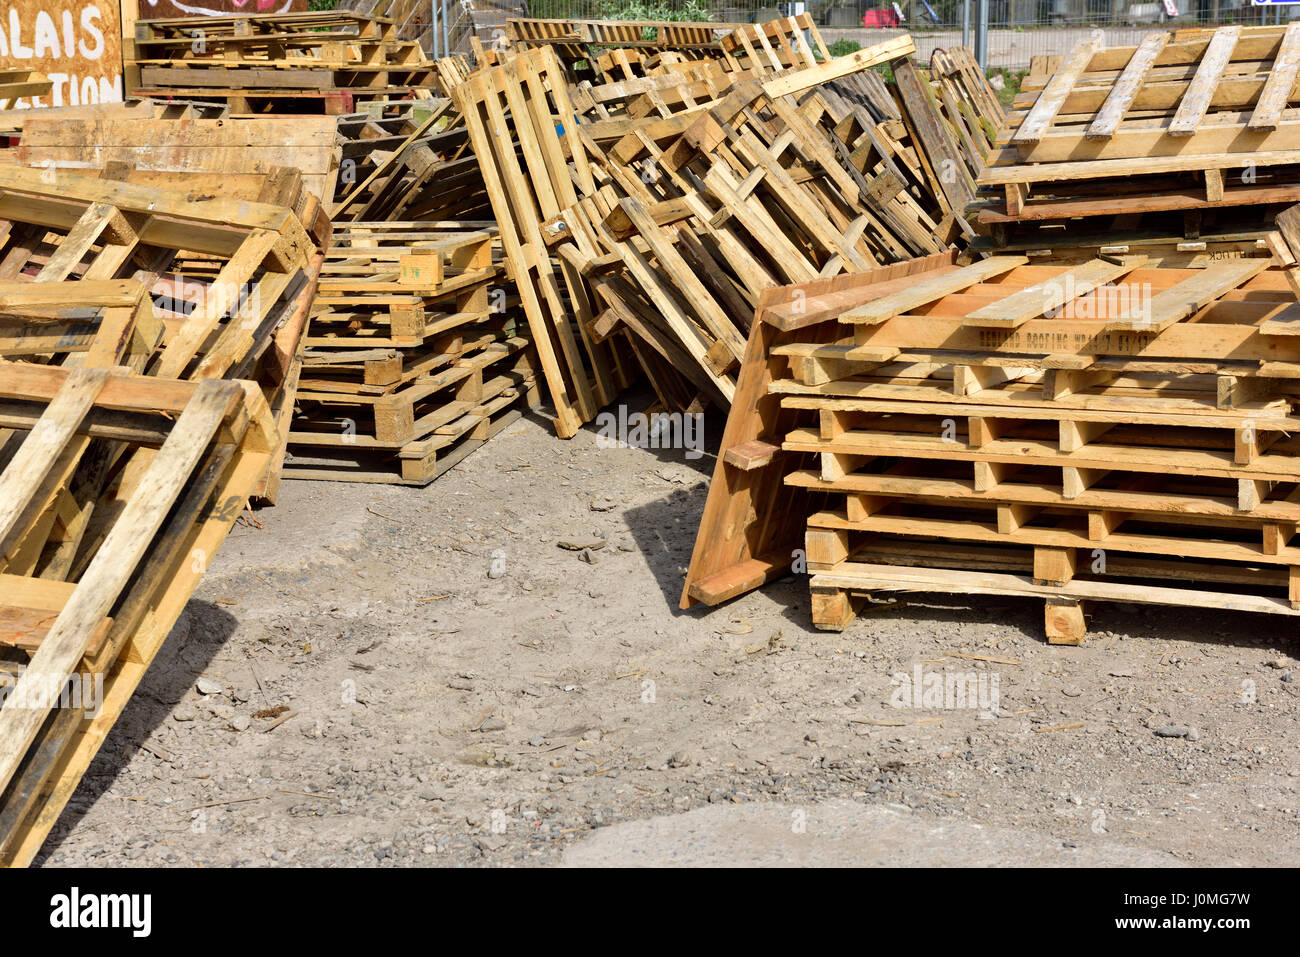 Wooden pallets and scrap wood for recycling Stock Photo